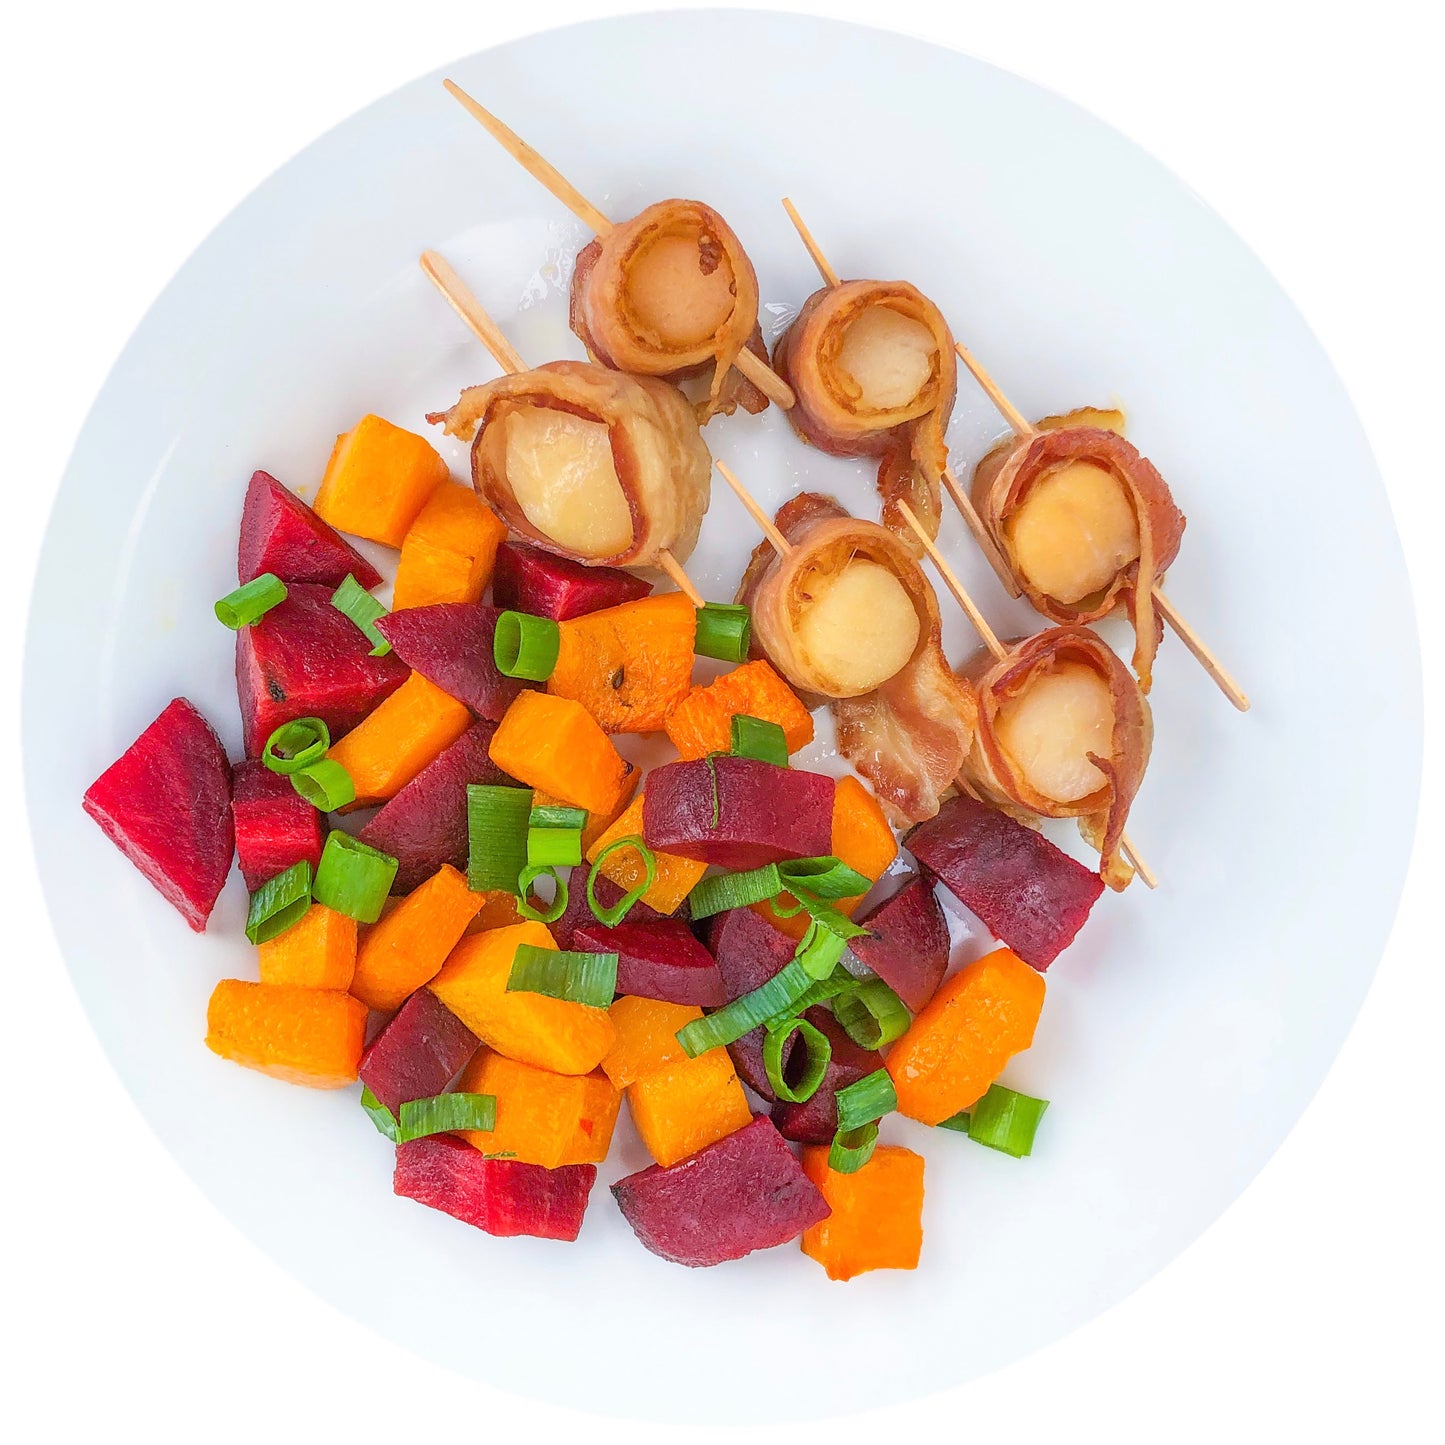 BACON WRAPPED SCALLOPS with ROASTED BEATS AND BUTTERNUT SQUASH